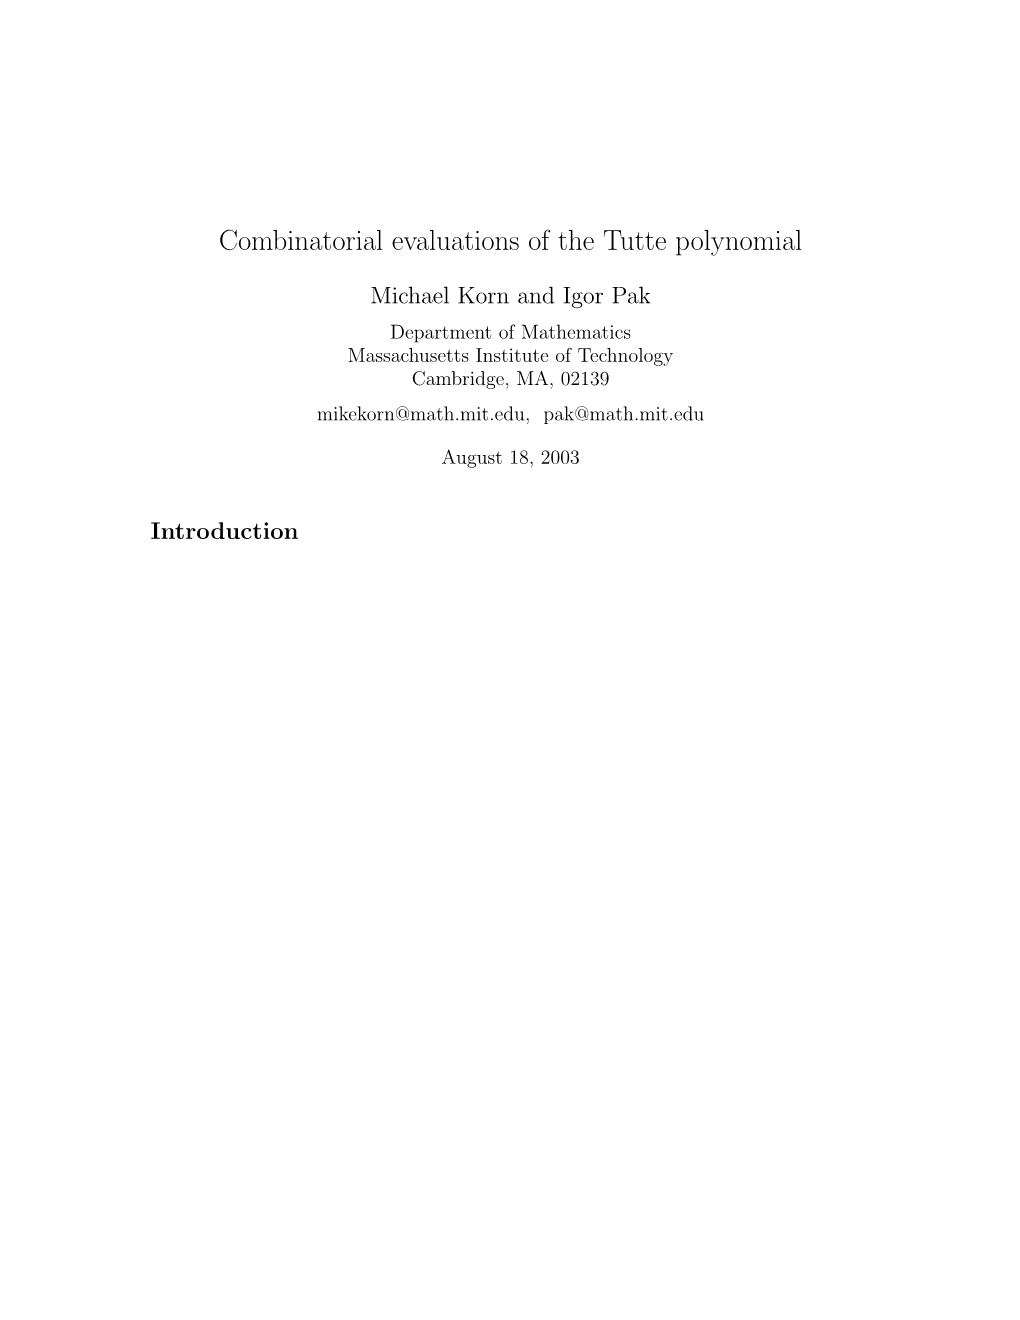 Combinatorial Evaluations of the Tutte Polynomial